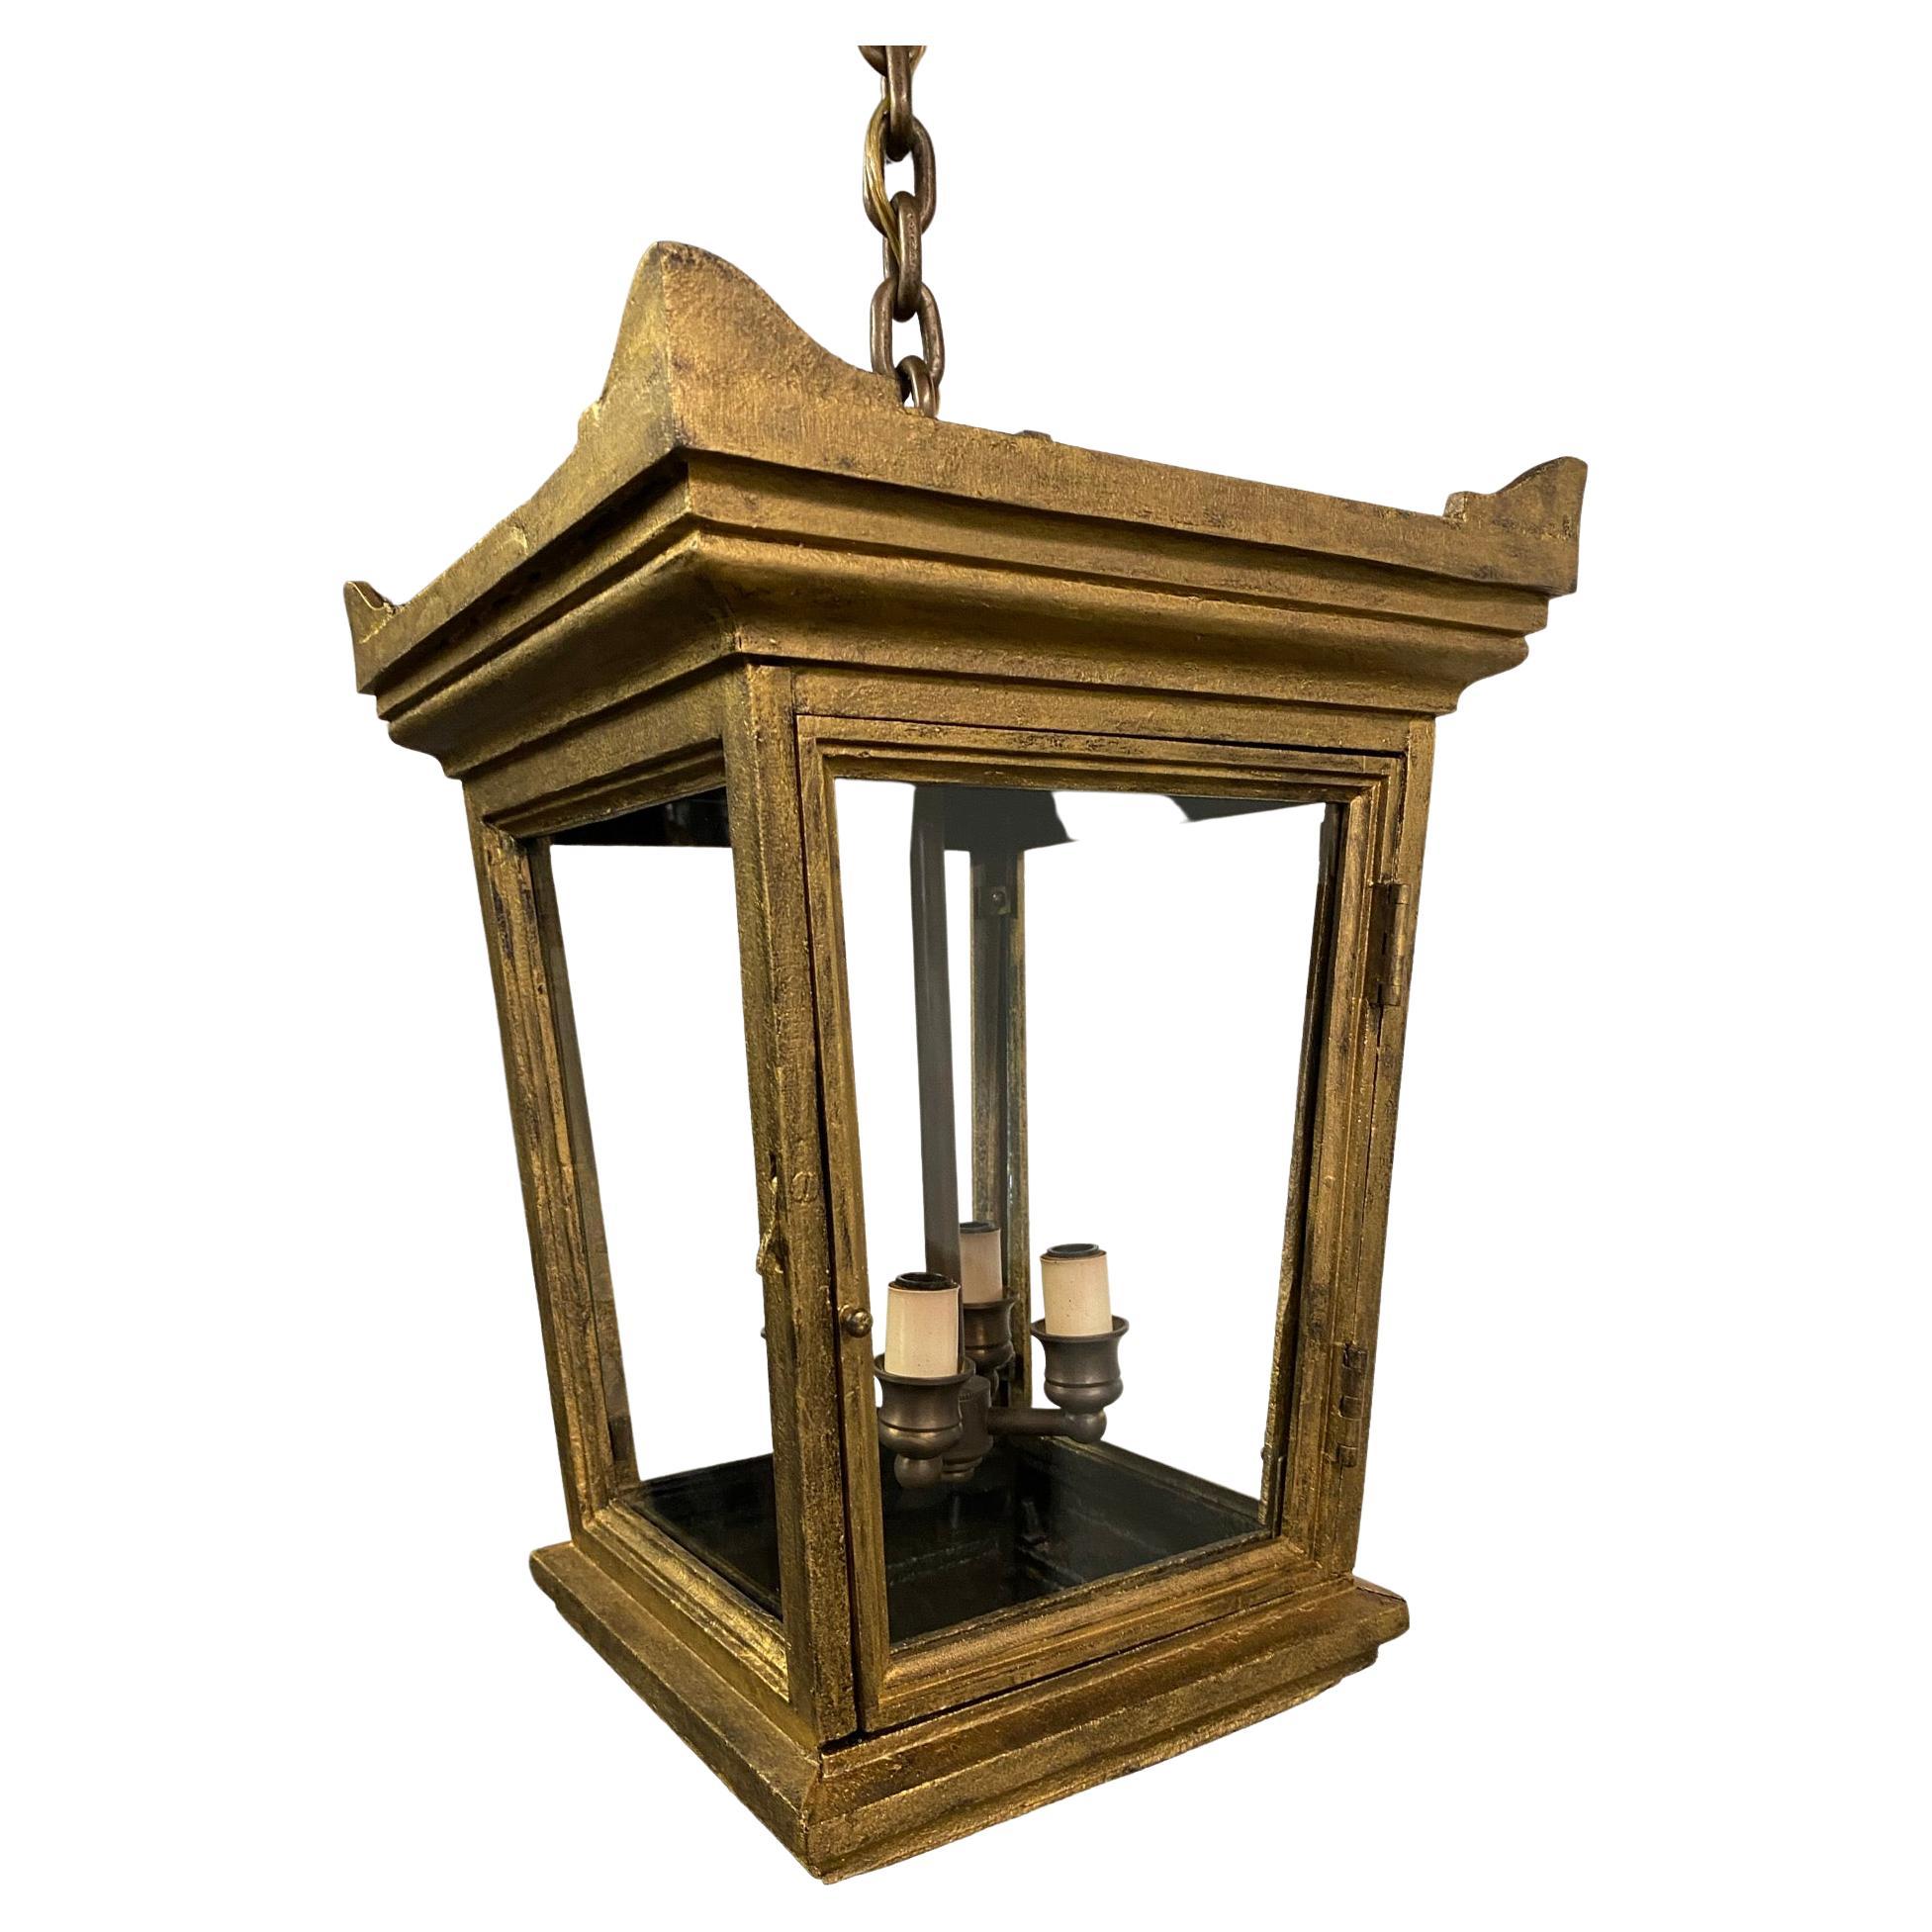 Be it classical, Neoclassical or Regency style, this gold toned hanging lantern will add a touch of classic influence to your entryway hall interior or exterior. Crafted in iron this lantern has a hint of Chinese pagoda lantern influence giving it a